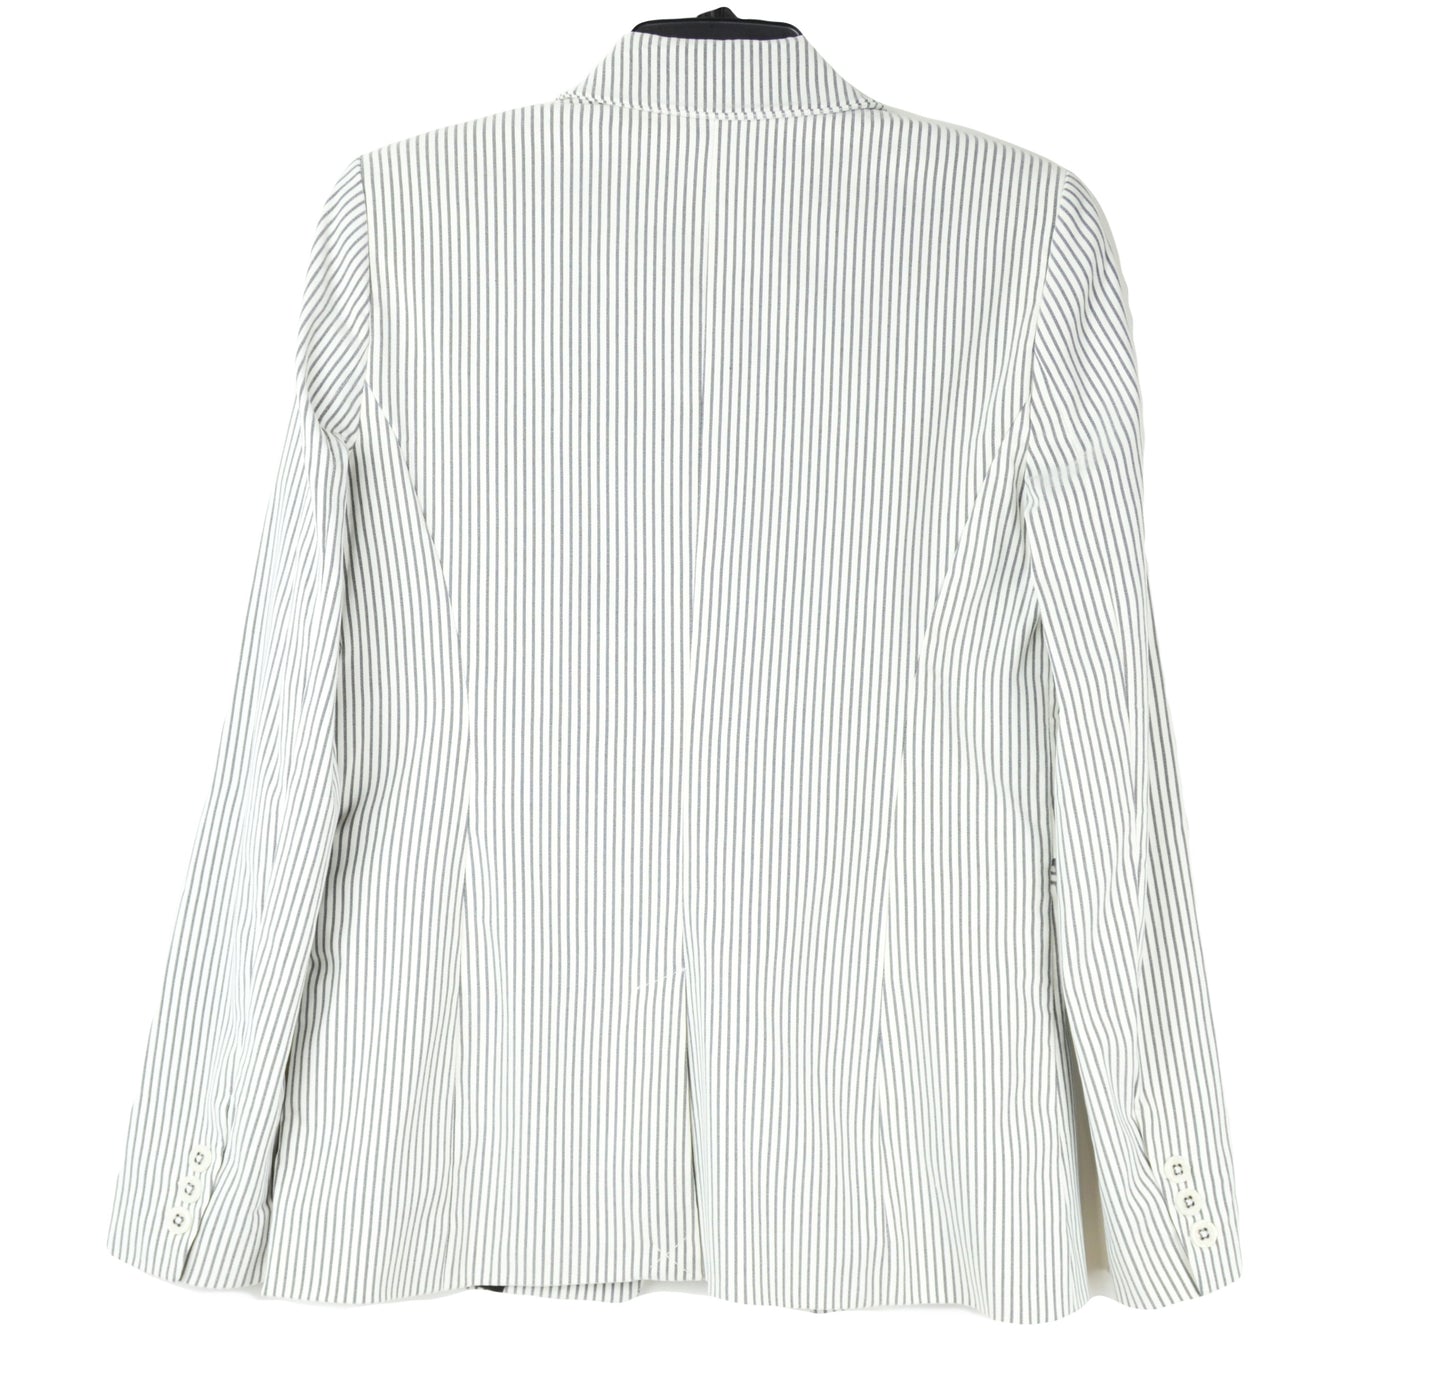 CAROLINA BELLE Striped Classic Fit Double Breasted Blazer